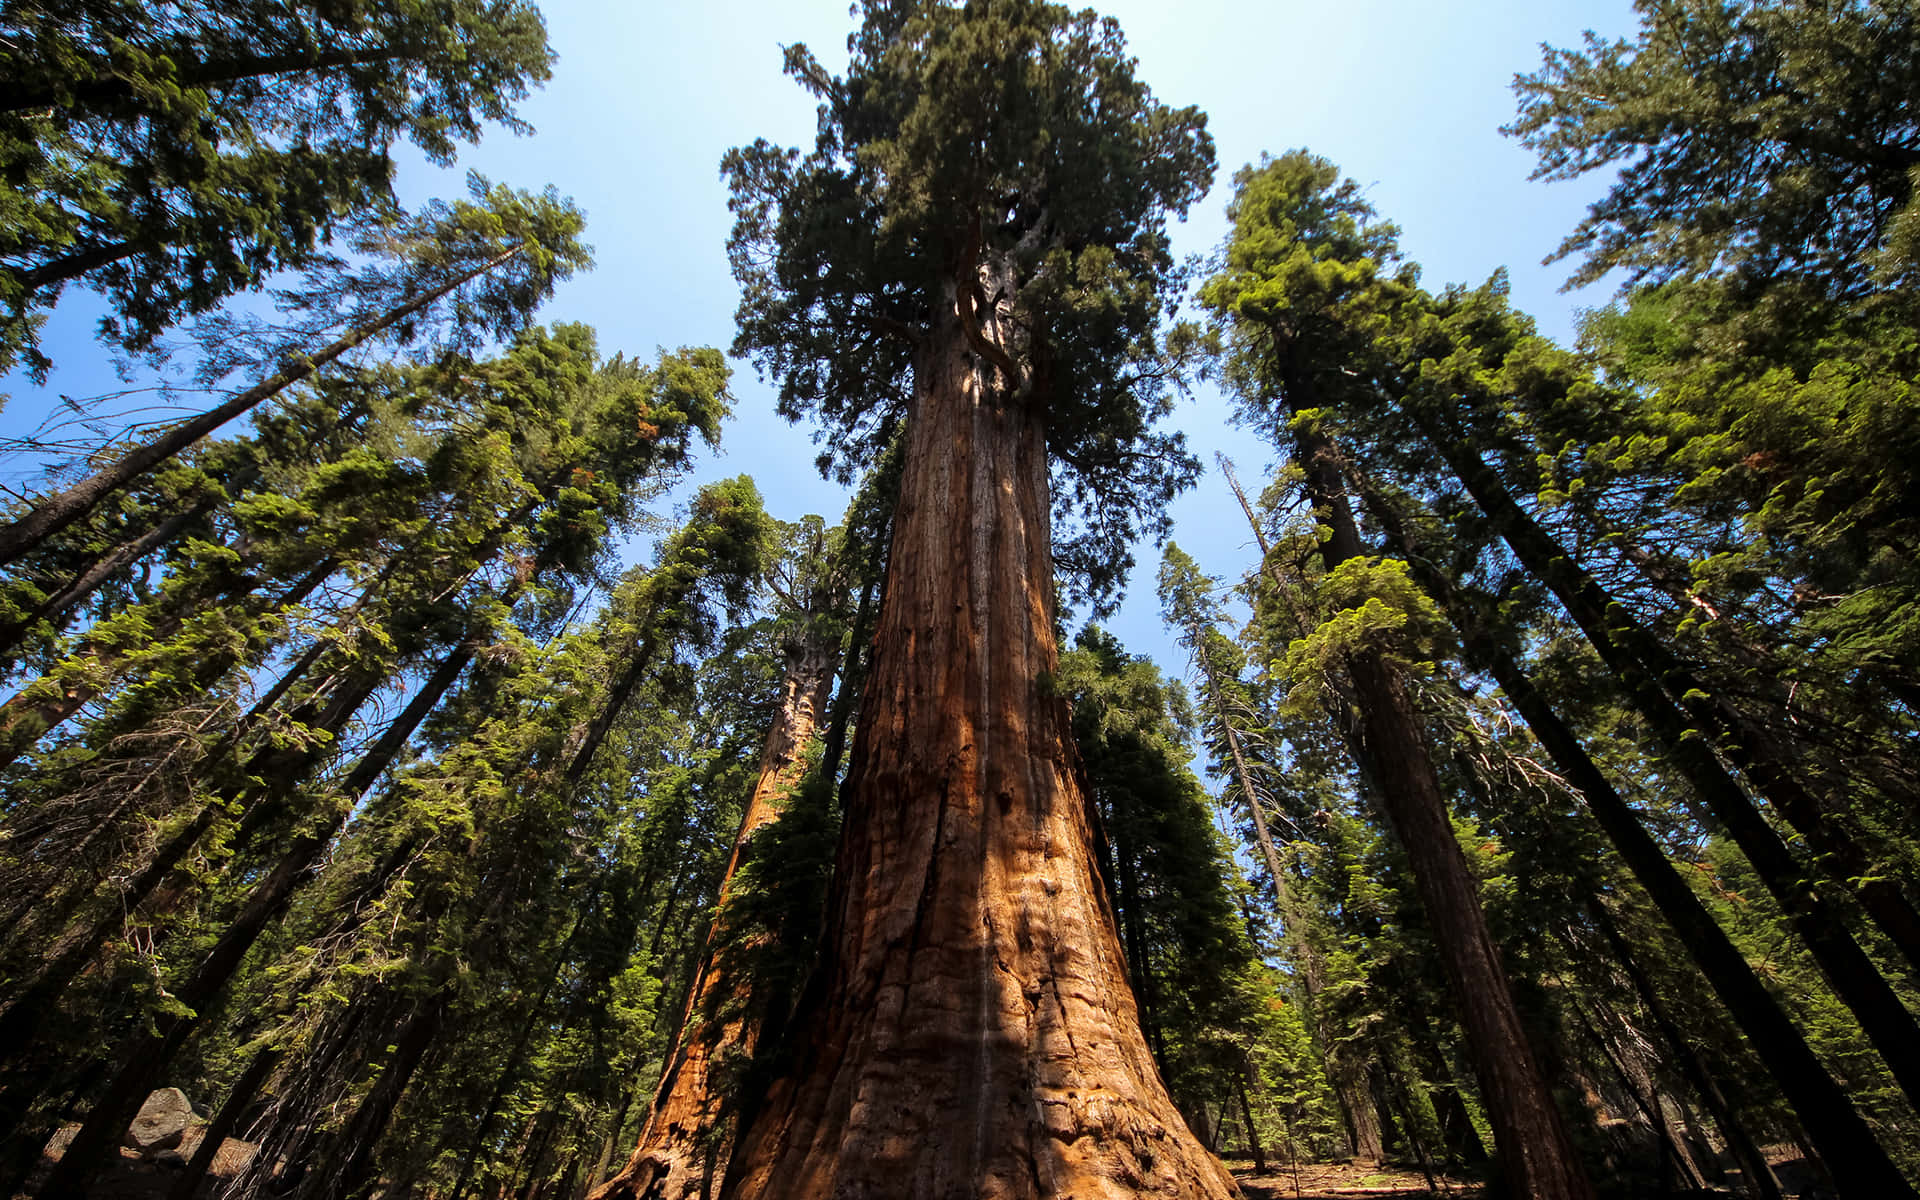 “Gigantic Redwood Trees fill the forest"